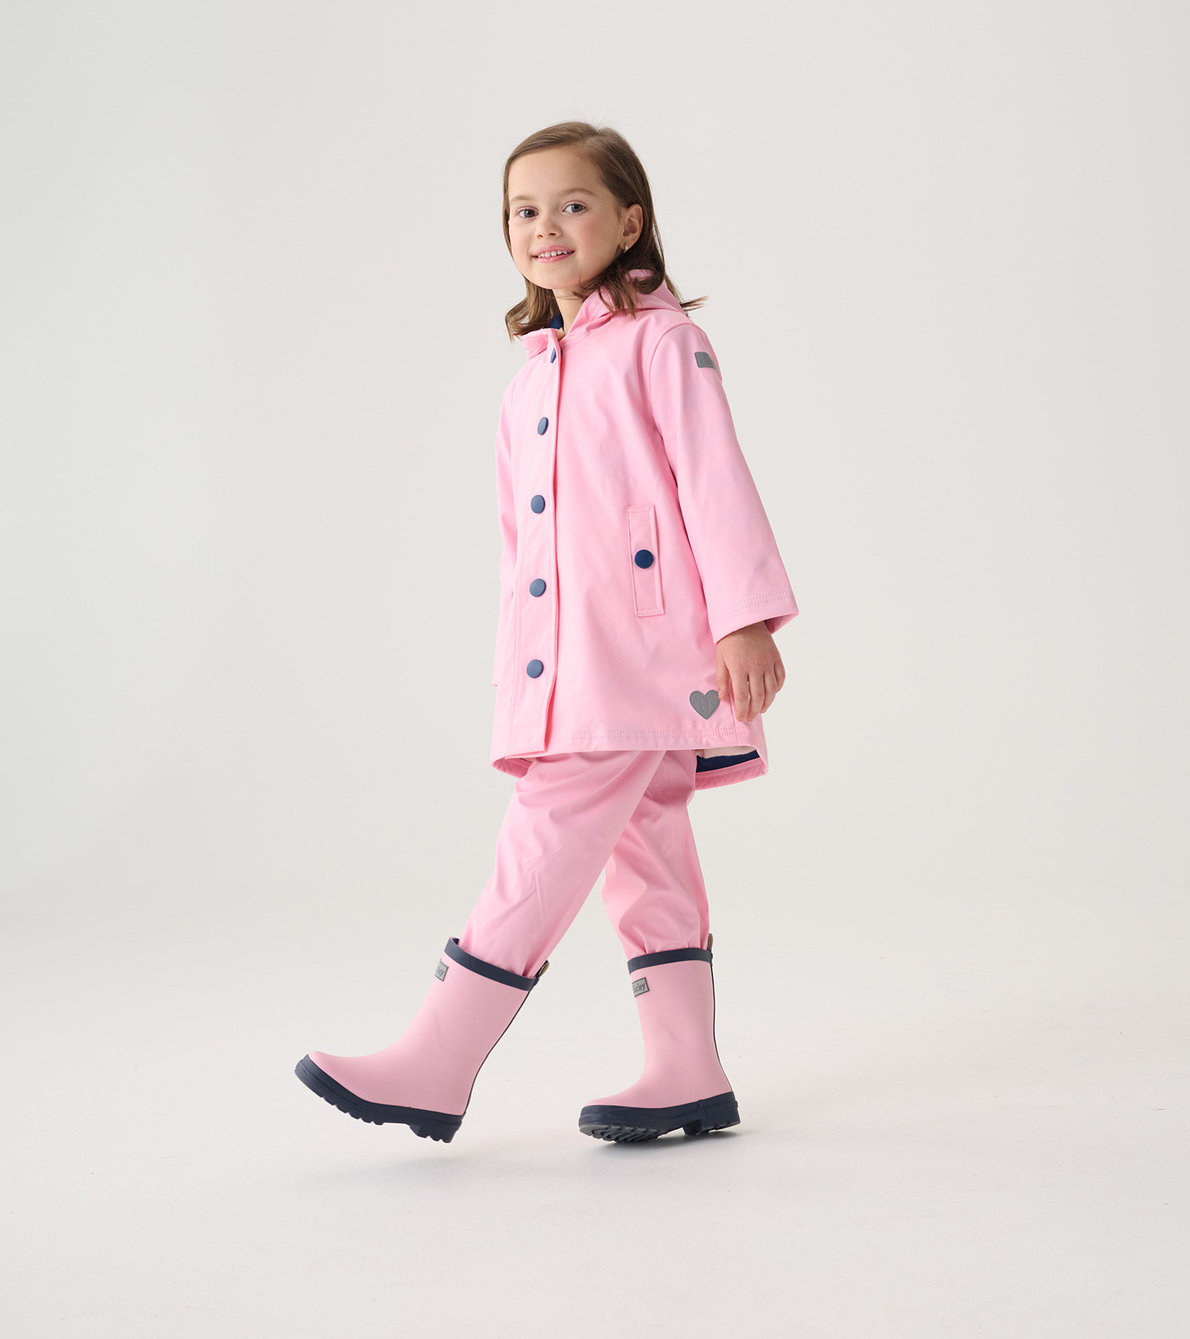 View larger image of Girls Pink & Navy Button-Up Rain Jacket